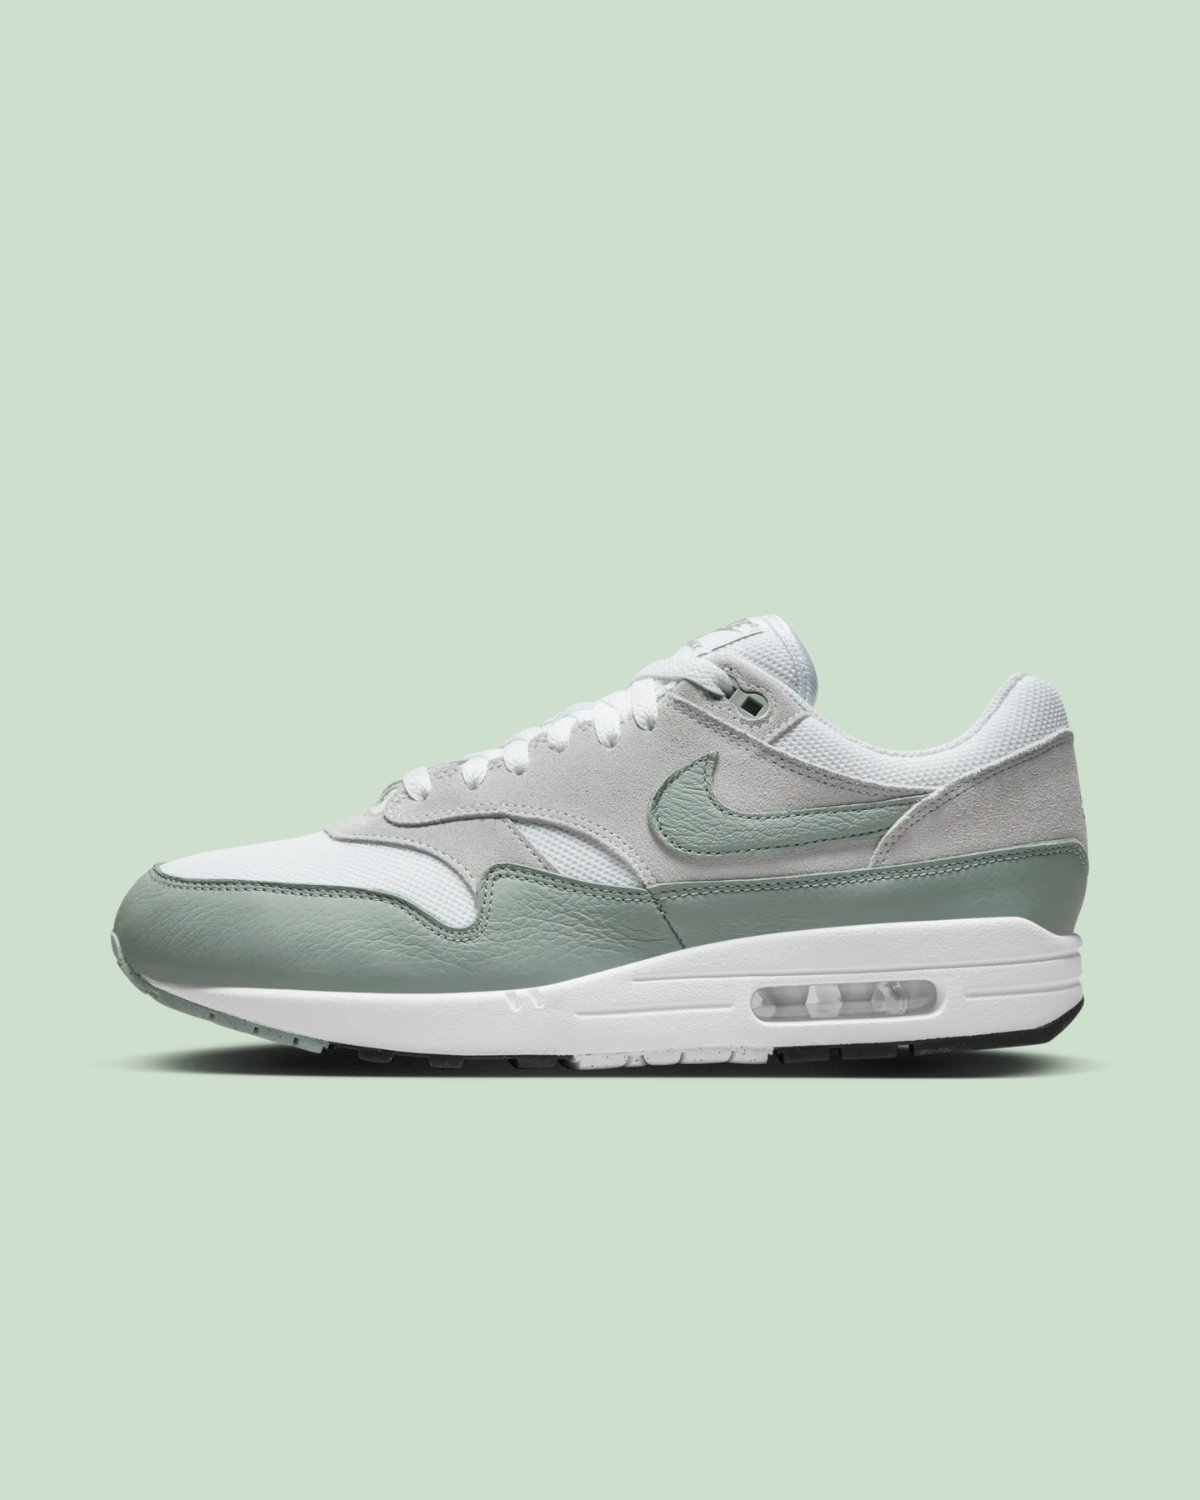 Nike.com on Twitter: "Laidback and easy-to-style. The Air Max 1 'Mica  Green' Available at 10am ET 🇺🇸 https://t.co/HcpkeB1nHe  https://t.co/ZhfXQmE9ud" / Twitter